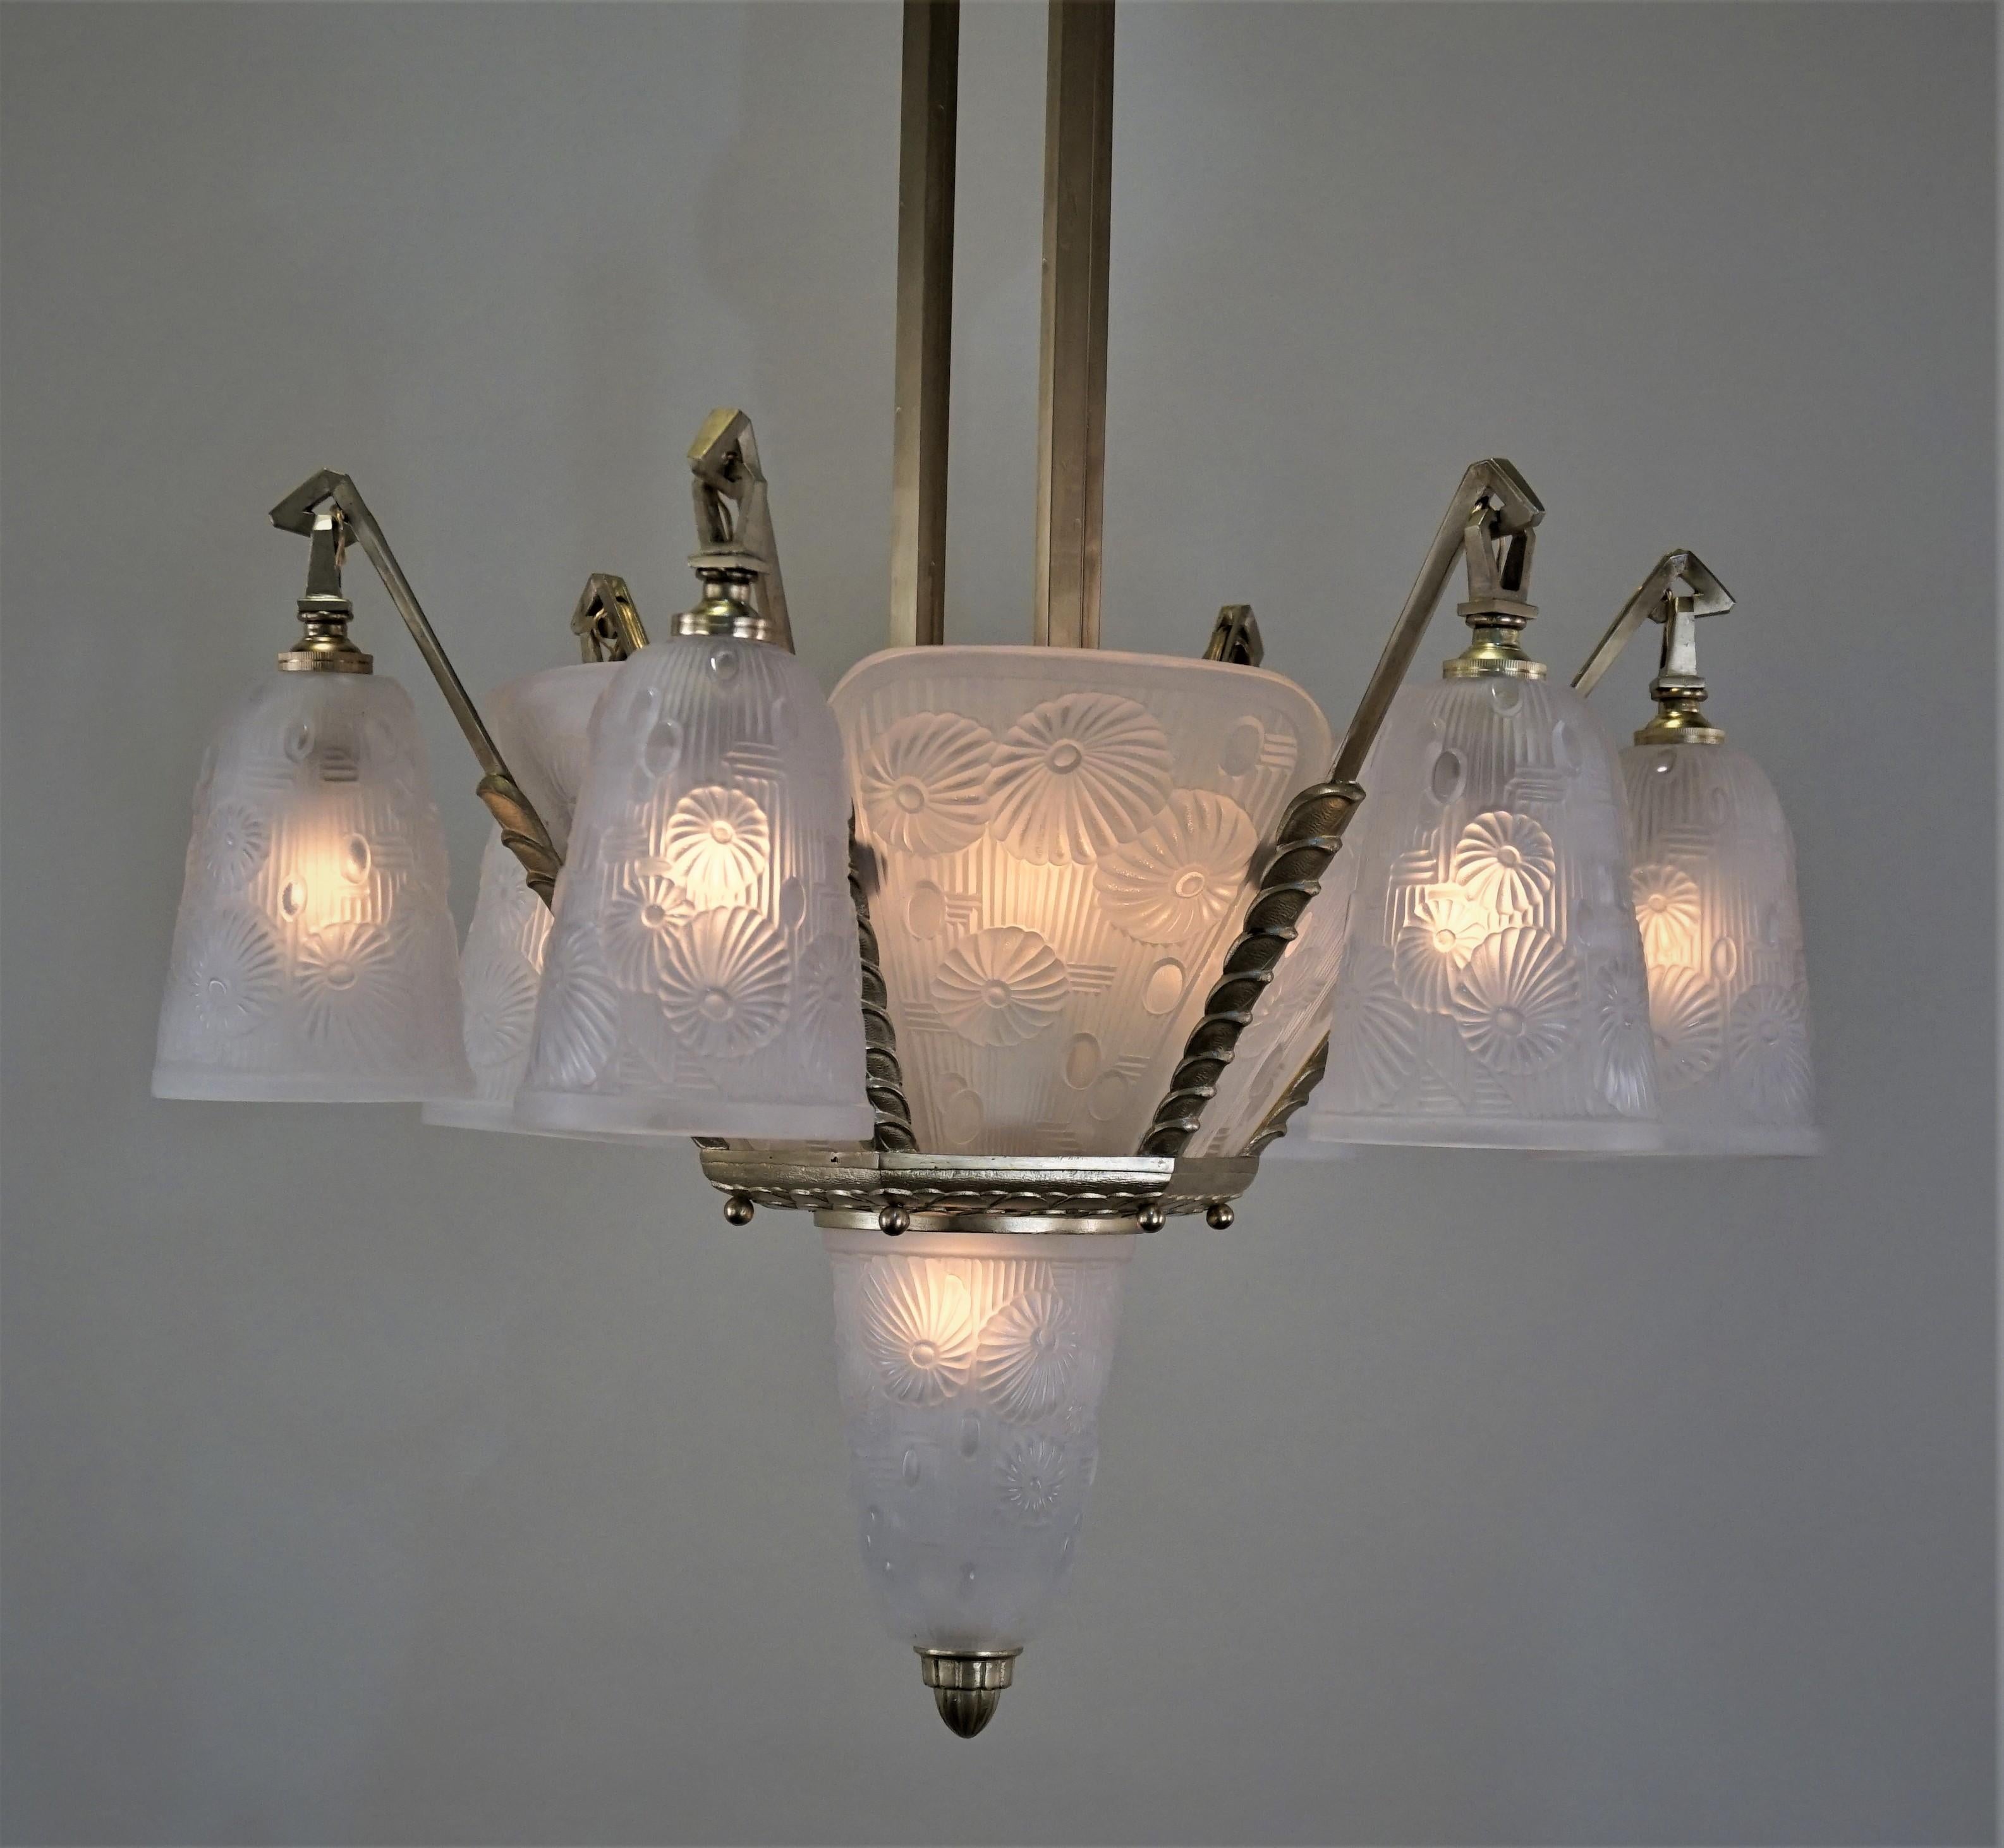 Modern flora design clear frost glass by Daum under name of Lorrain Nancy in late 1920s-early 1930s with fantastic bronze frame Art Deco chandelier.
Total of 13 lights, 60 watt max each.